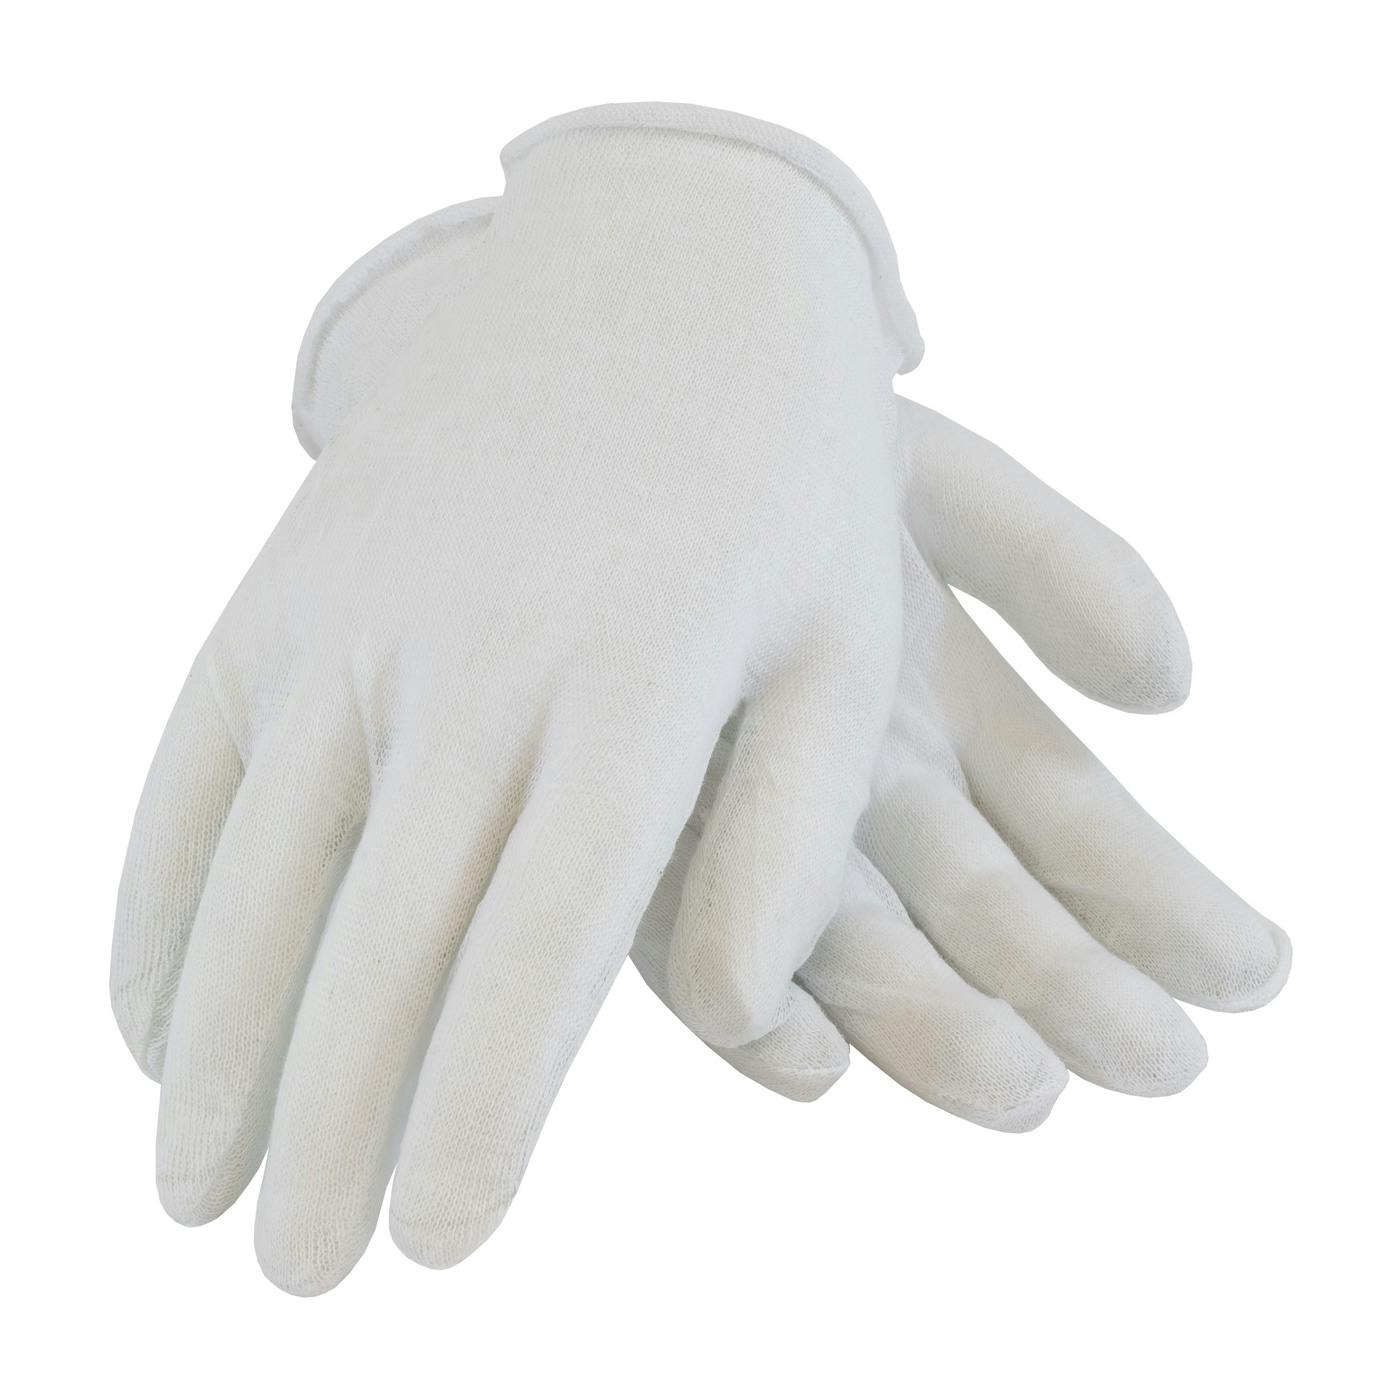 Economy, Light Weight Cotton Lisle Inspection Glove with Unhemmed Cuff - Ladies', White (97-501I) - LADIES